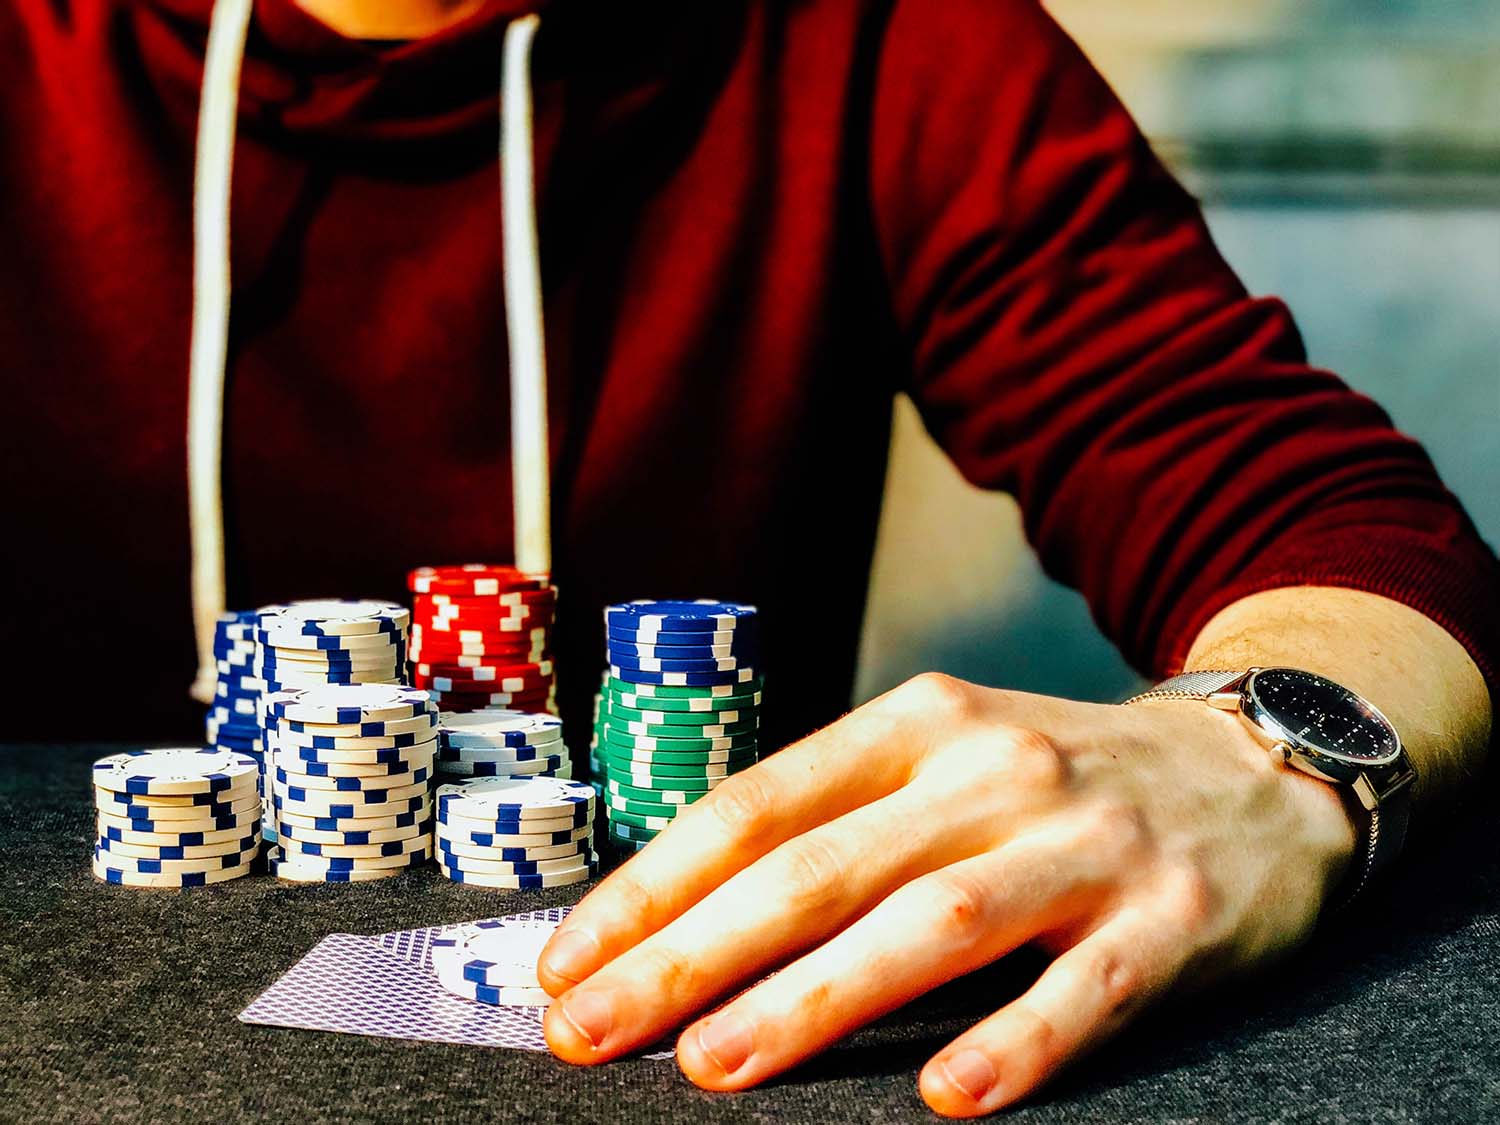 Best Online Casinos UK in 2021 With the Top Casino Games, Promotions &amp; More